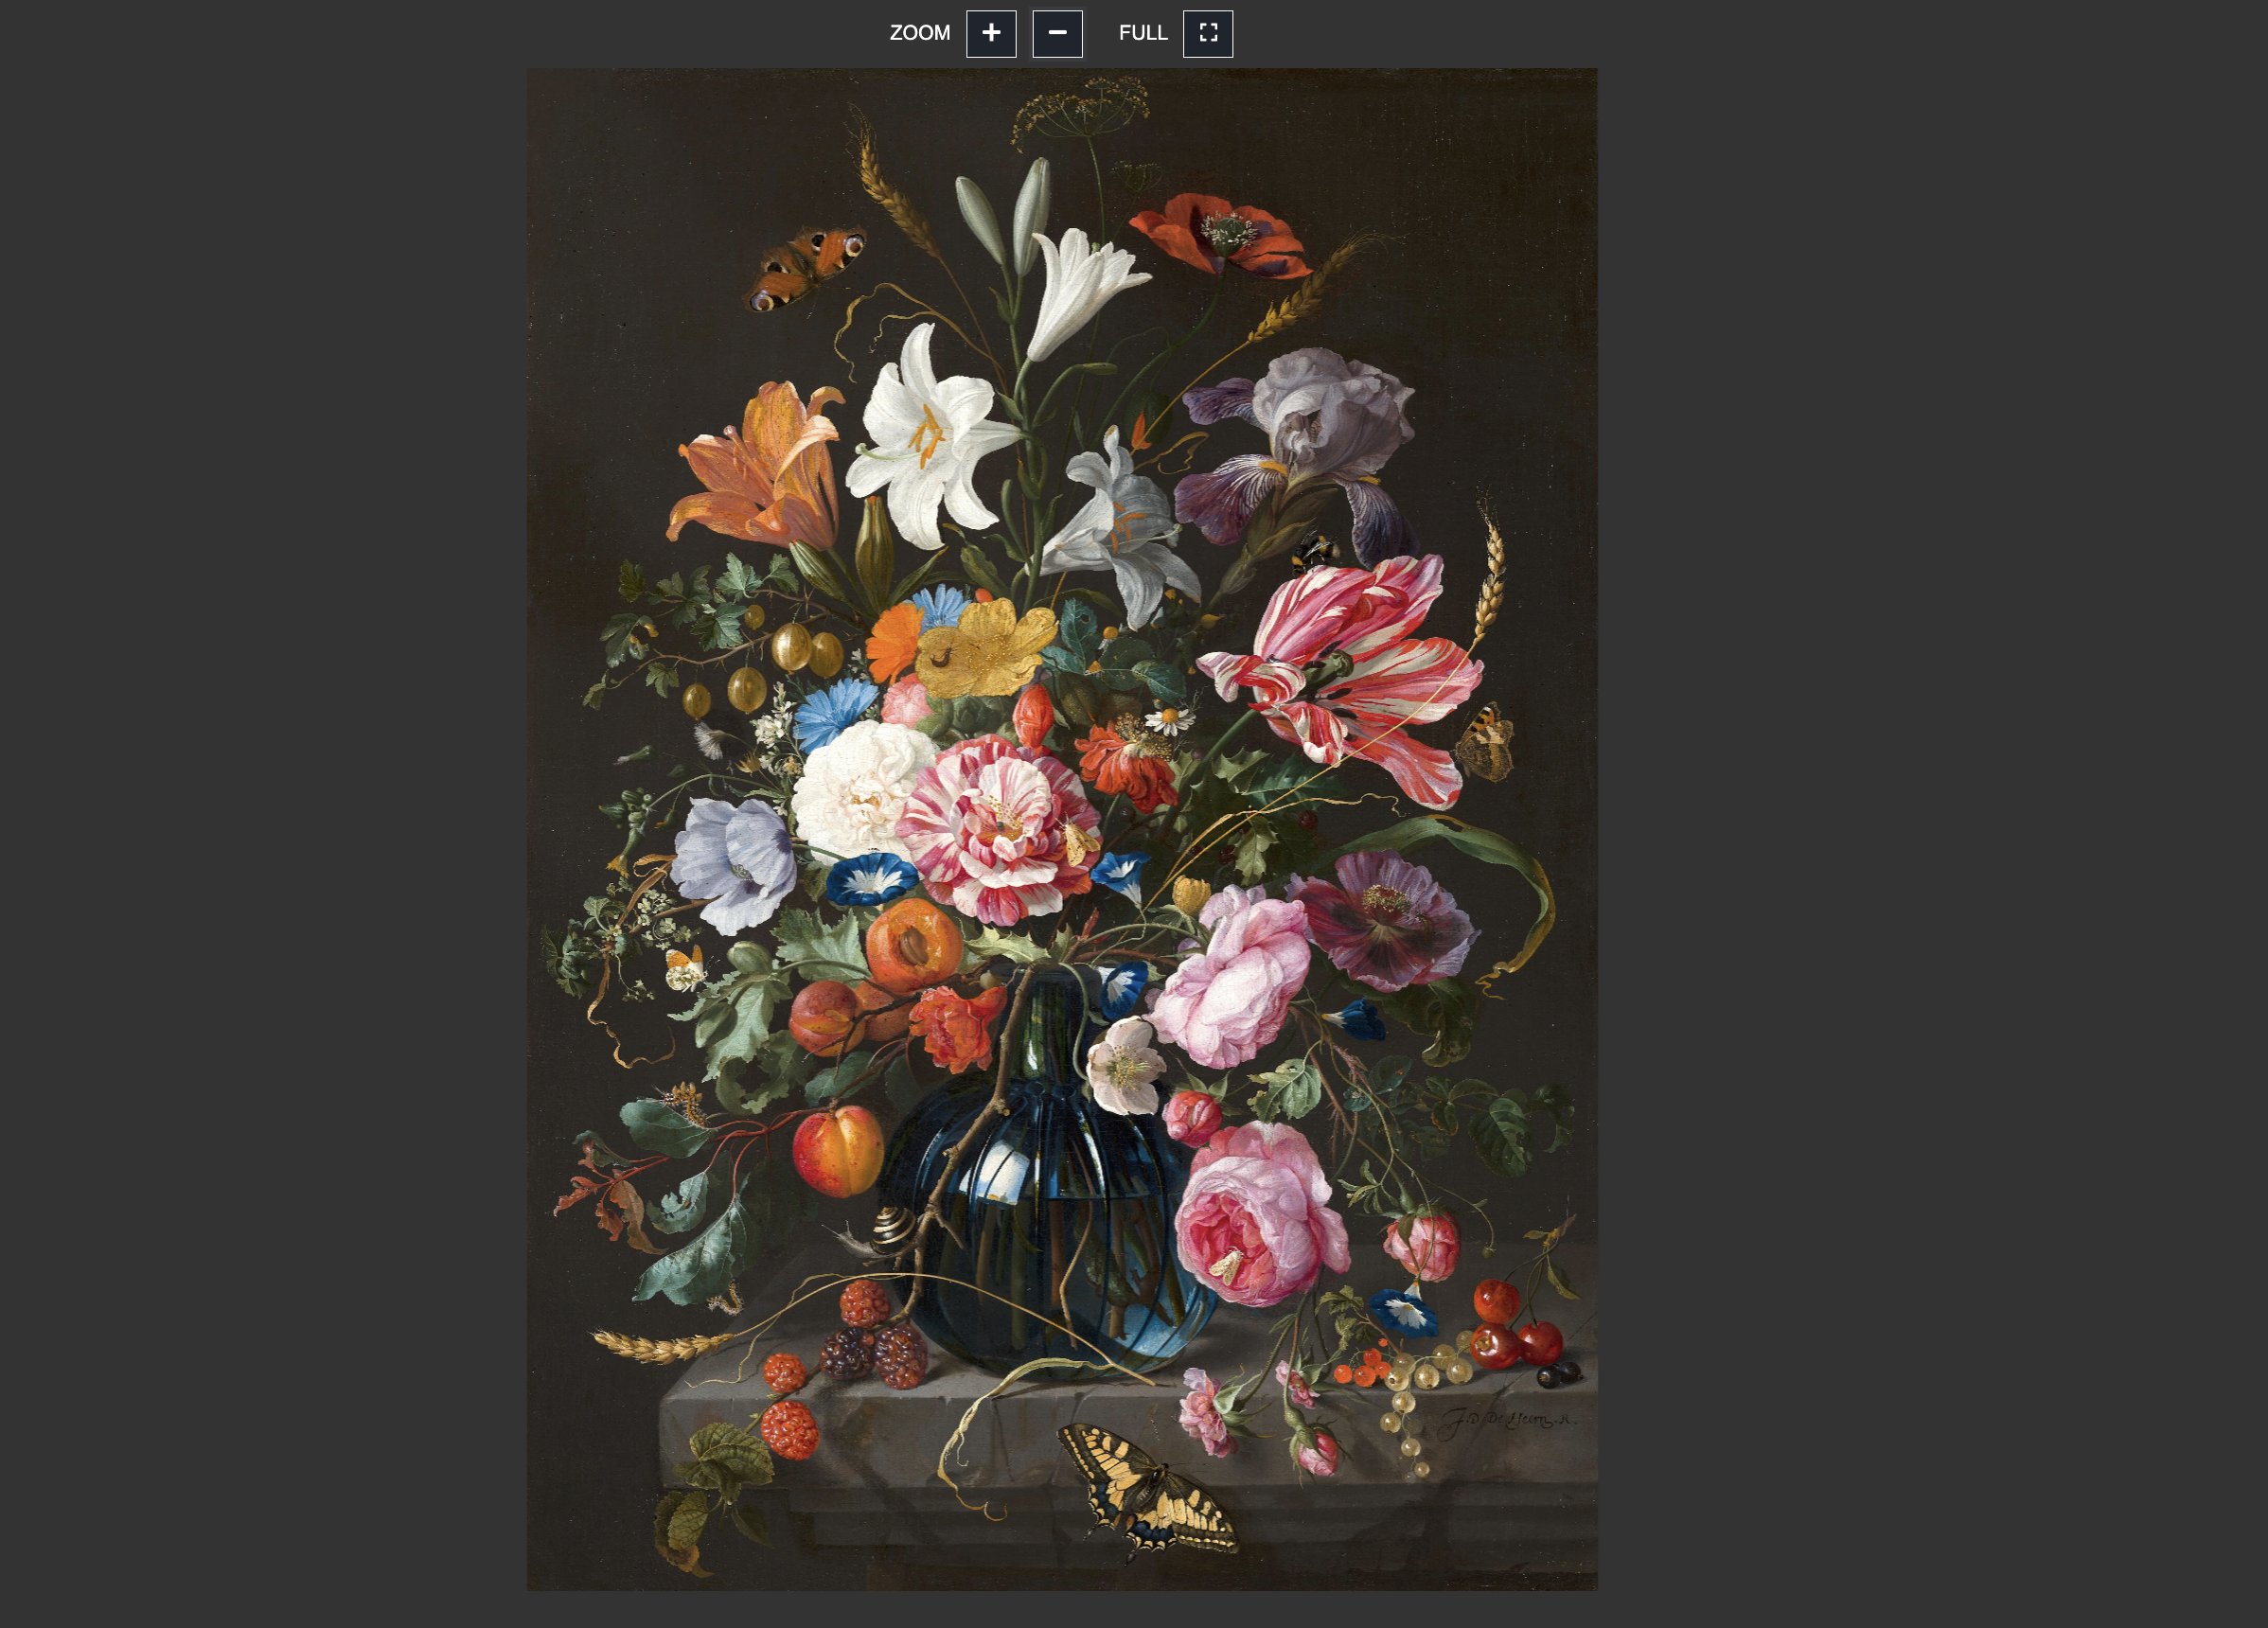 painting of a vase with colorful flowers and fruits zoomed out to show entire painting